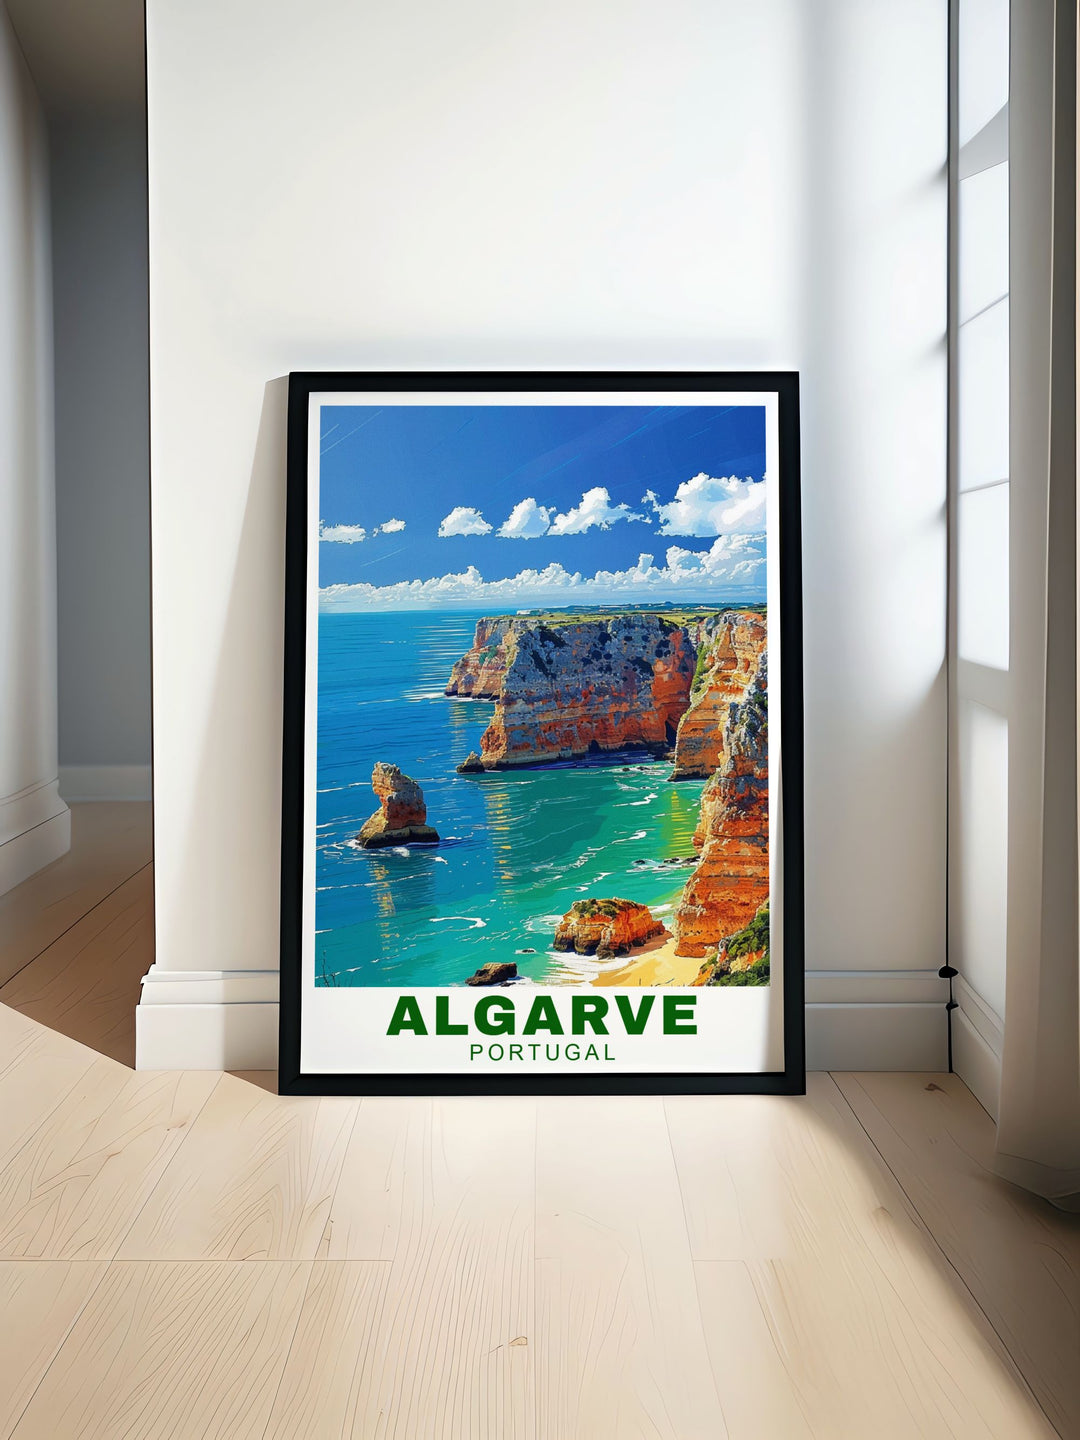 The iconic Algarve cliffs are brought to life in this detailed travel poster, showcasing their vibrant colors and stunning landscapes, perfect for any room in need of a coastal vibe.